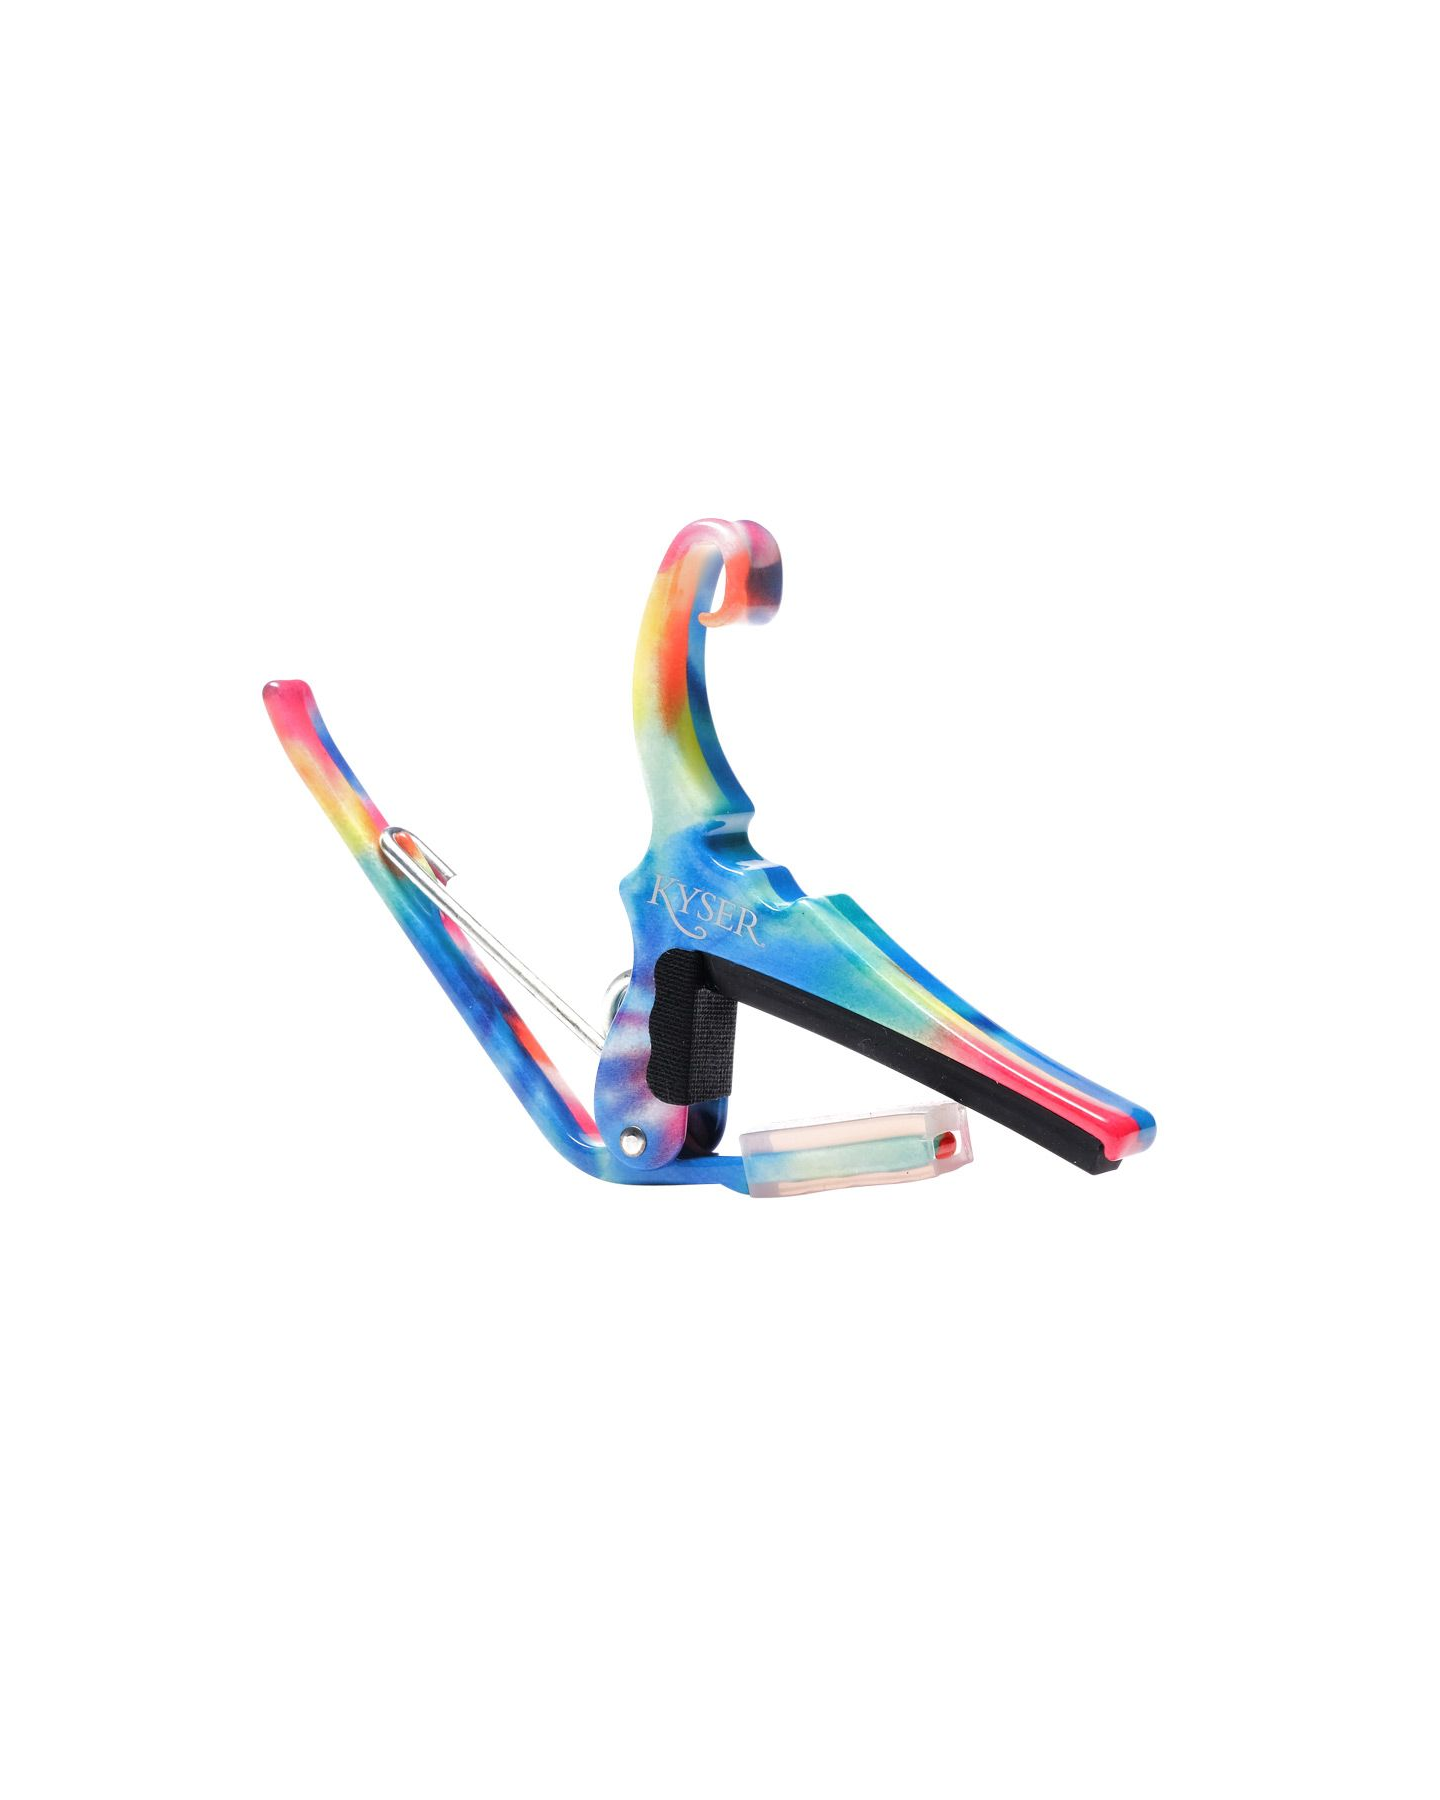 Kyser Quick-Change Capo for 6-String Guitars, Tie Dye